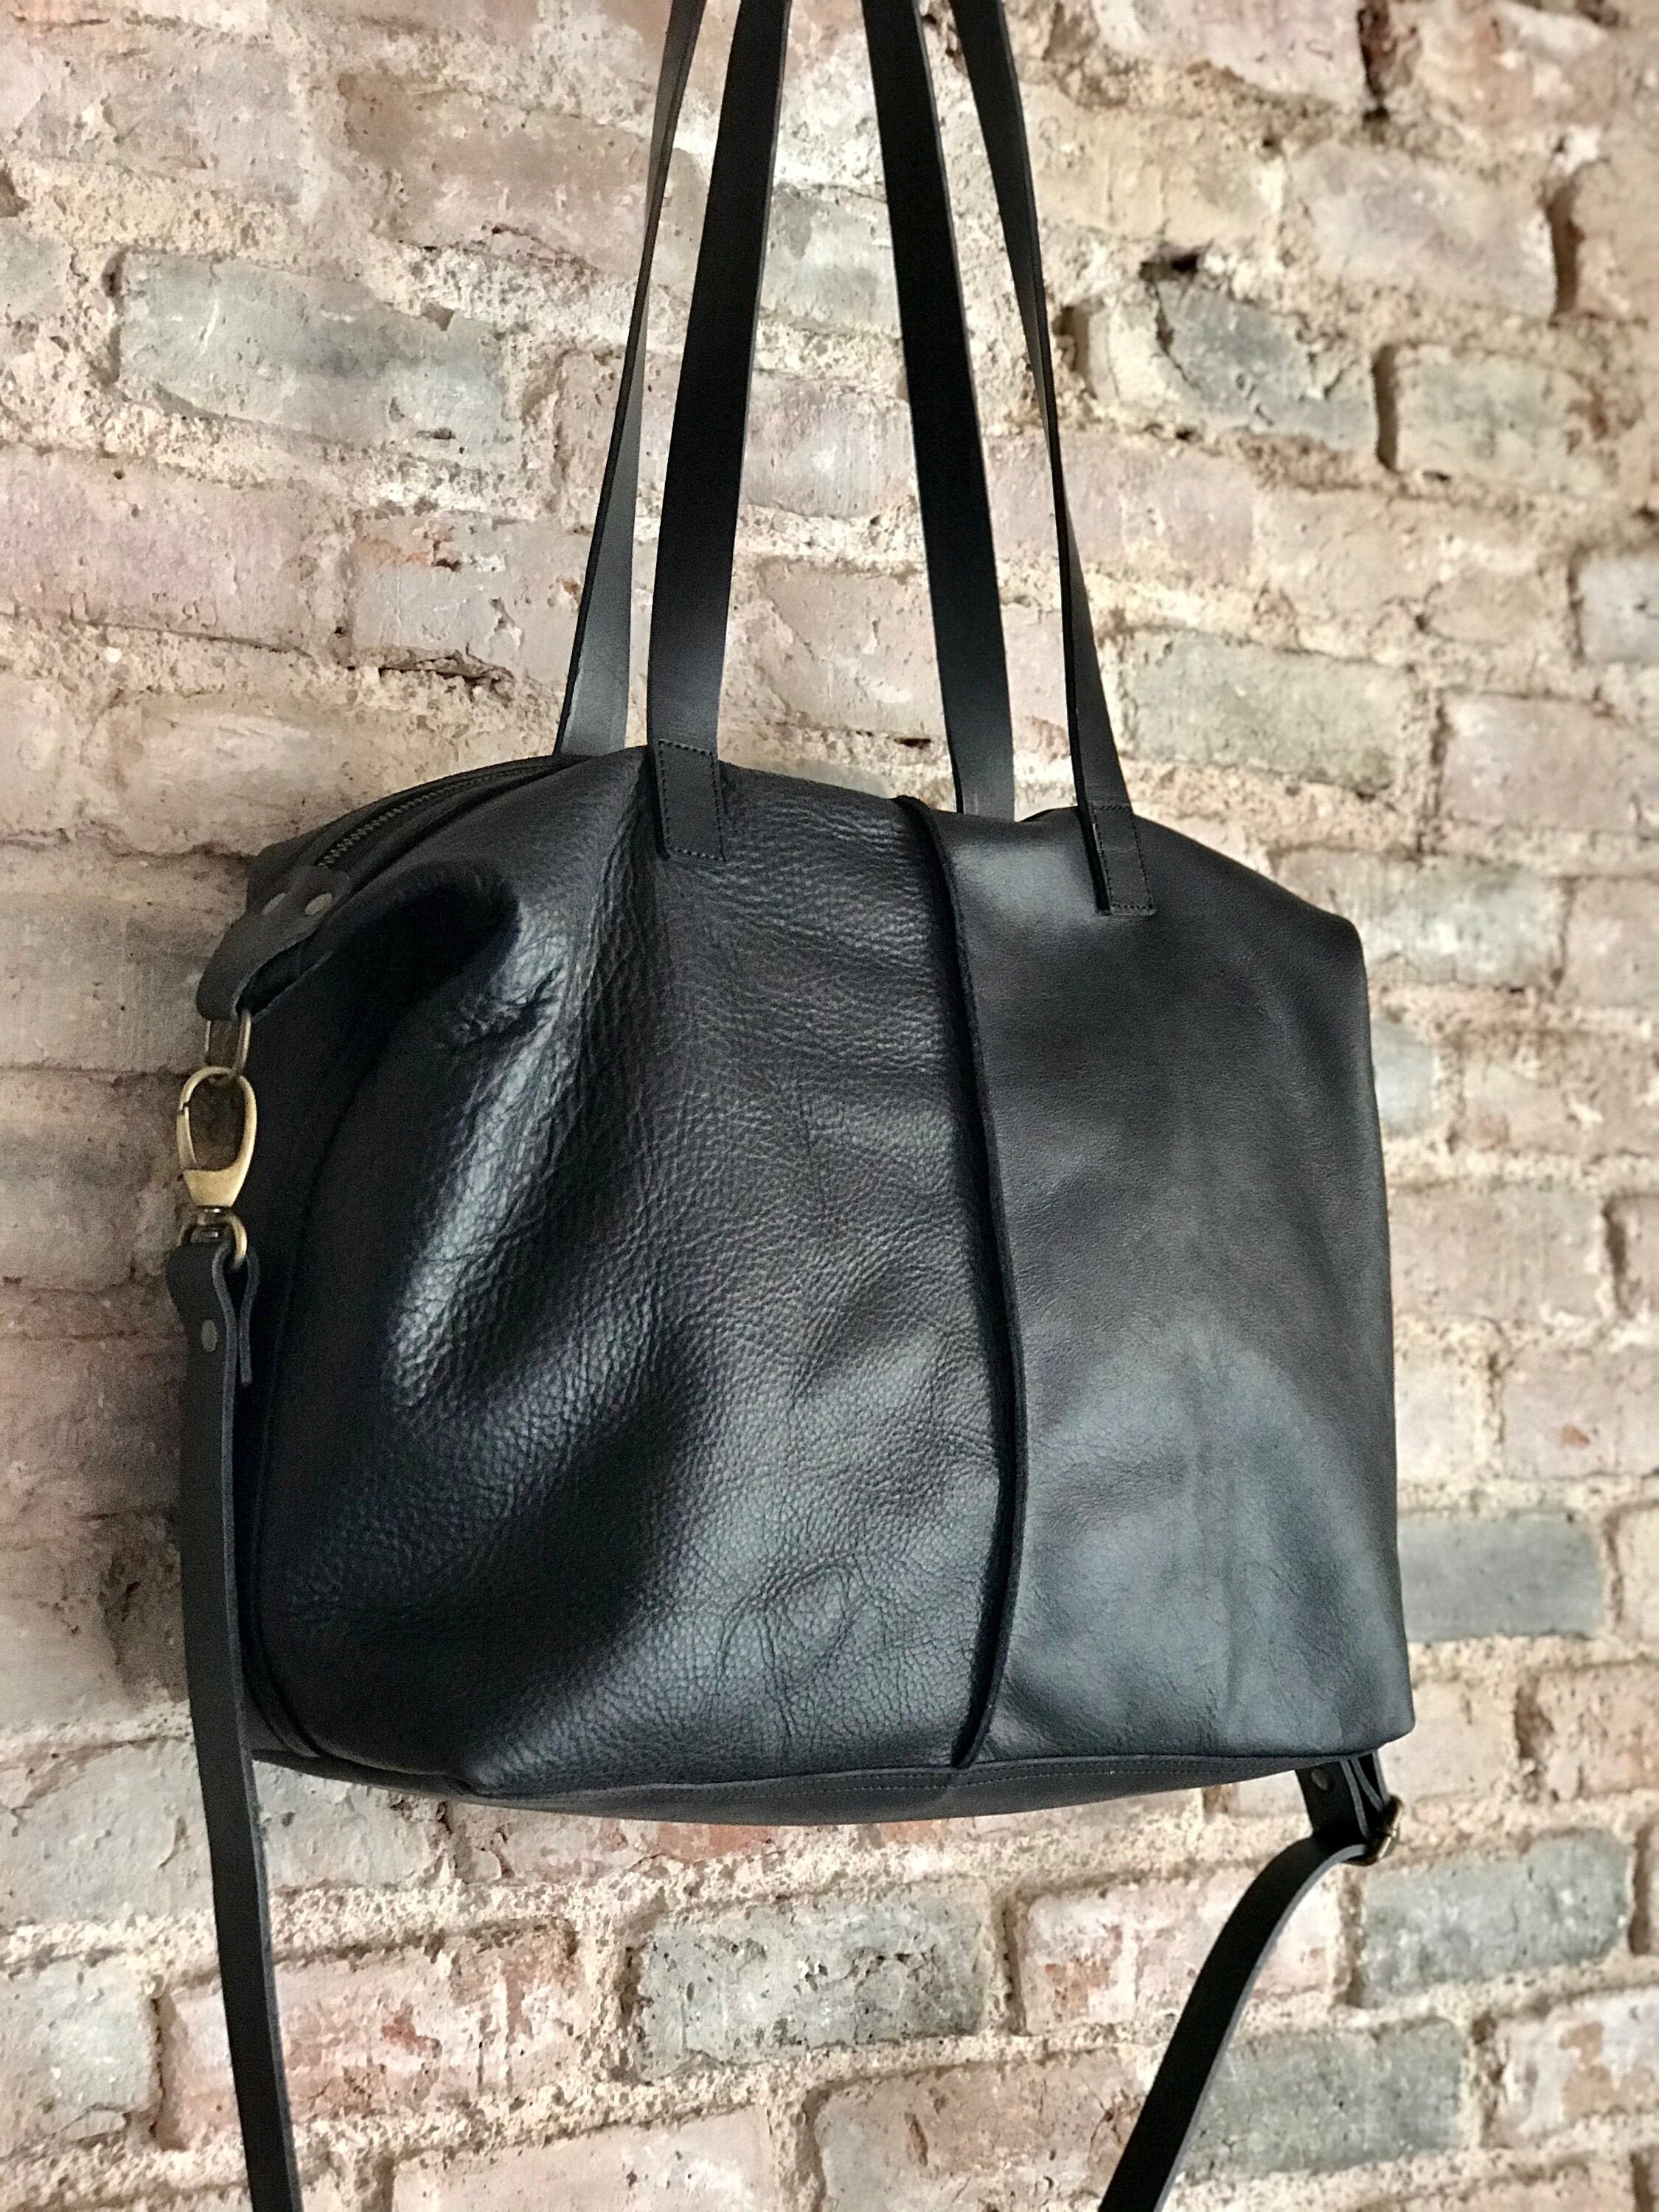 Black Leather bag with zip crossbody strap and inside lining. | Etsy